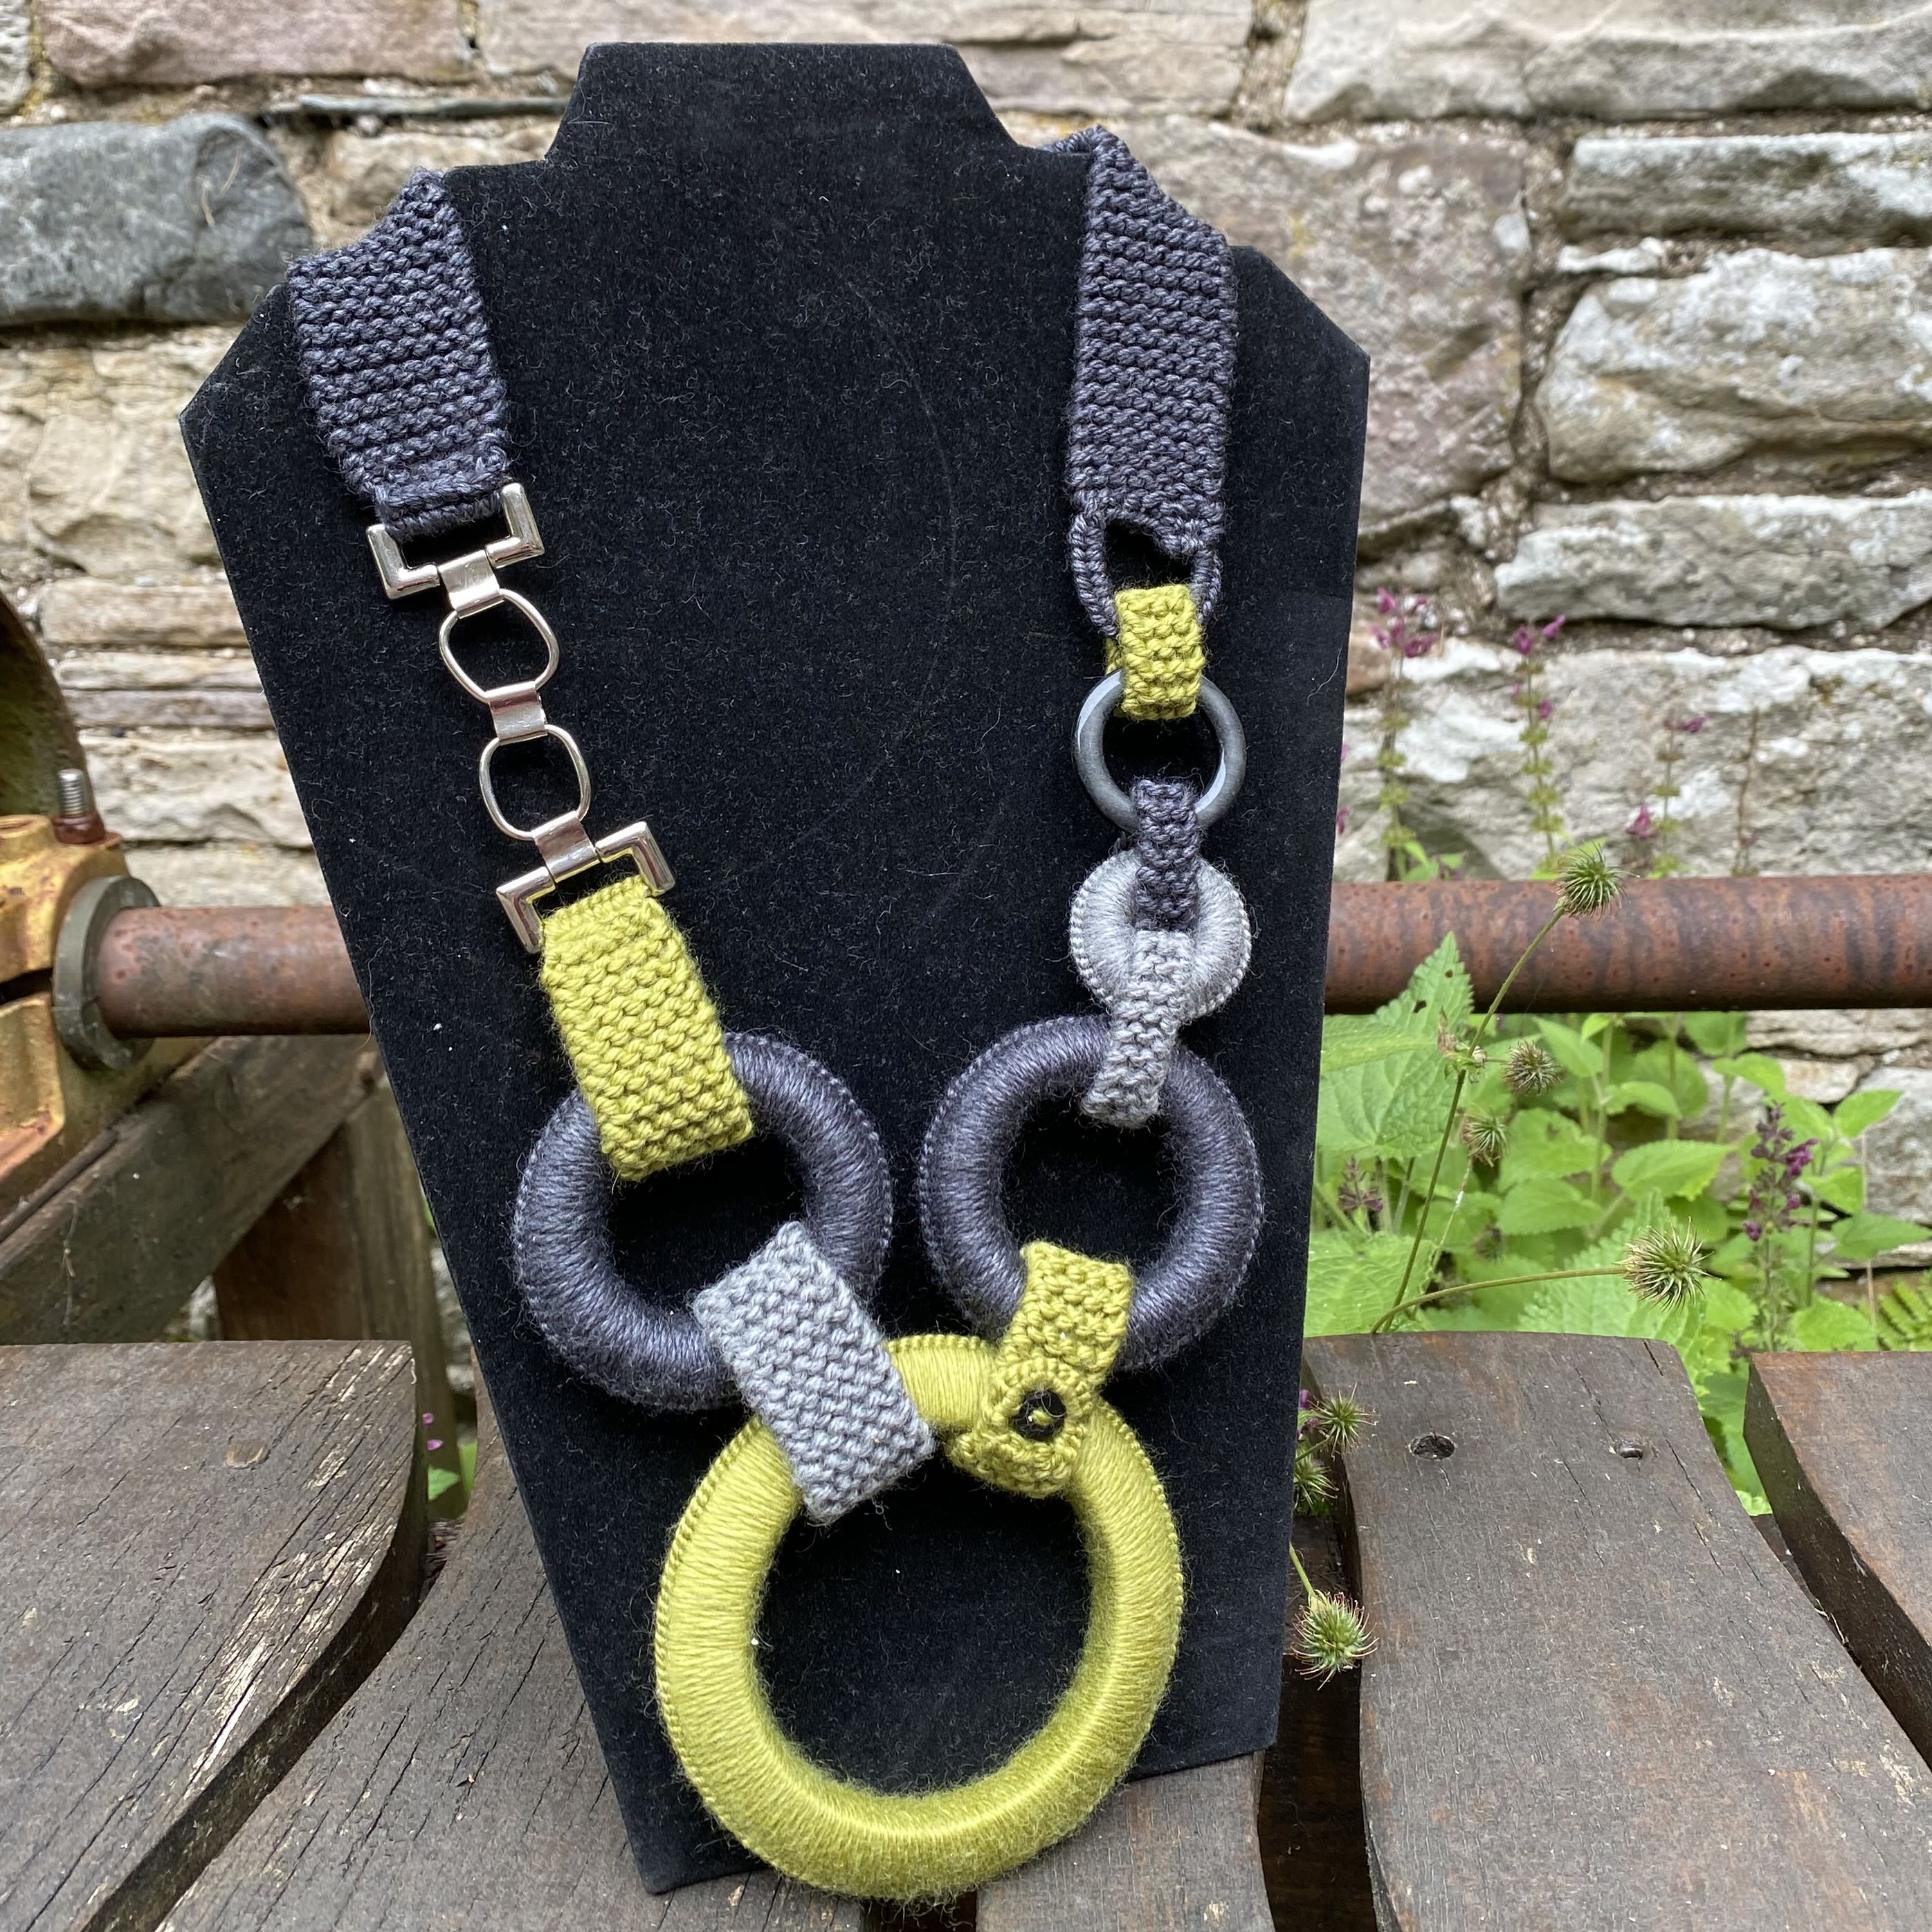 Handknitted necklace - Green and Charcoal